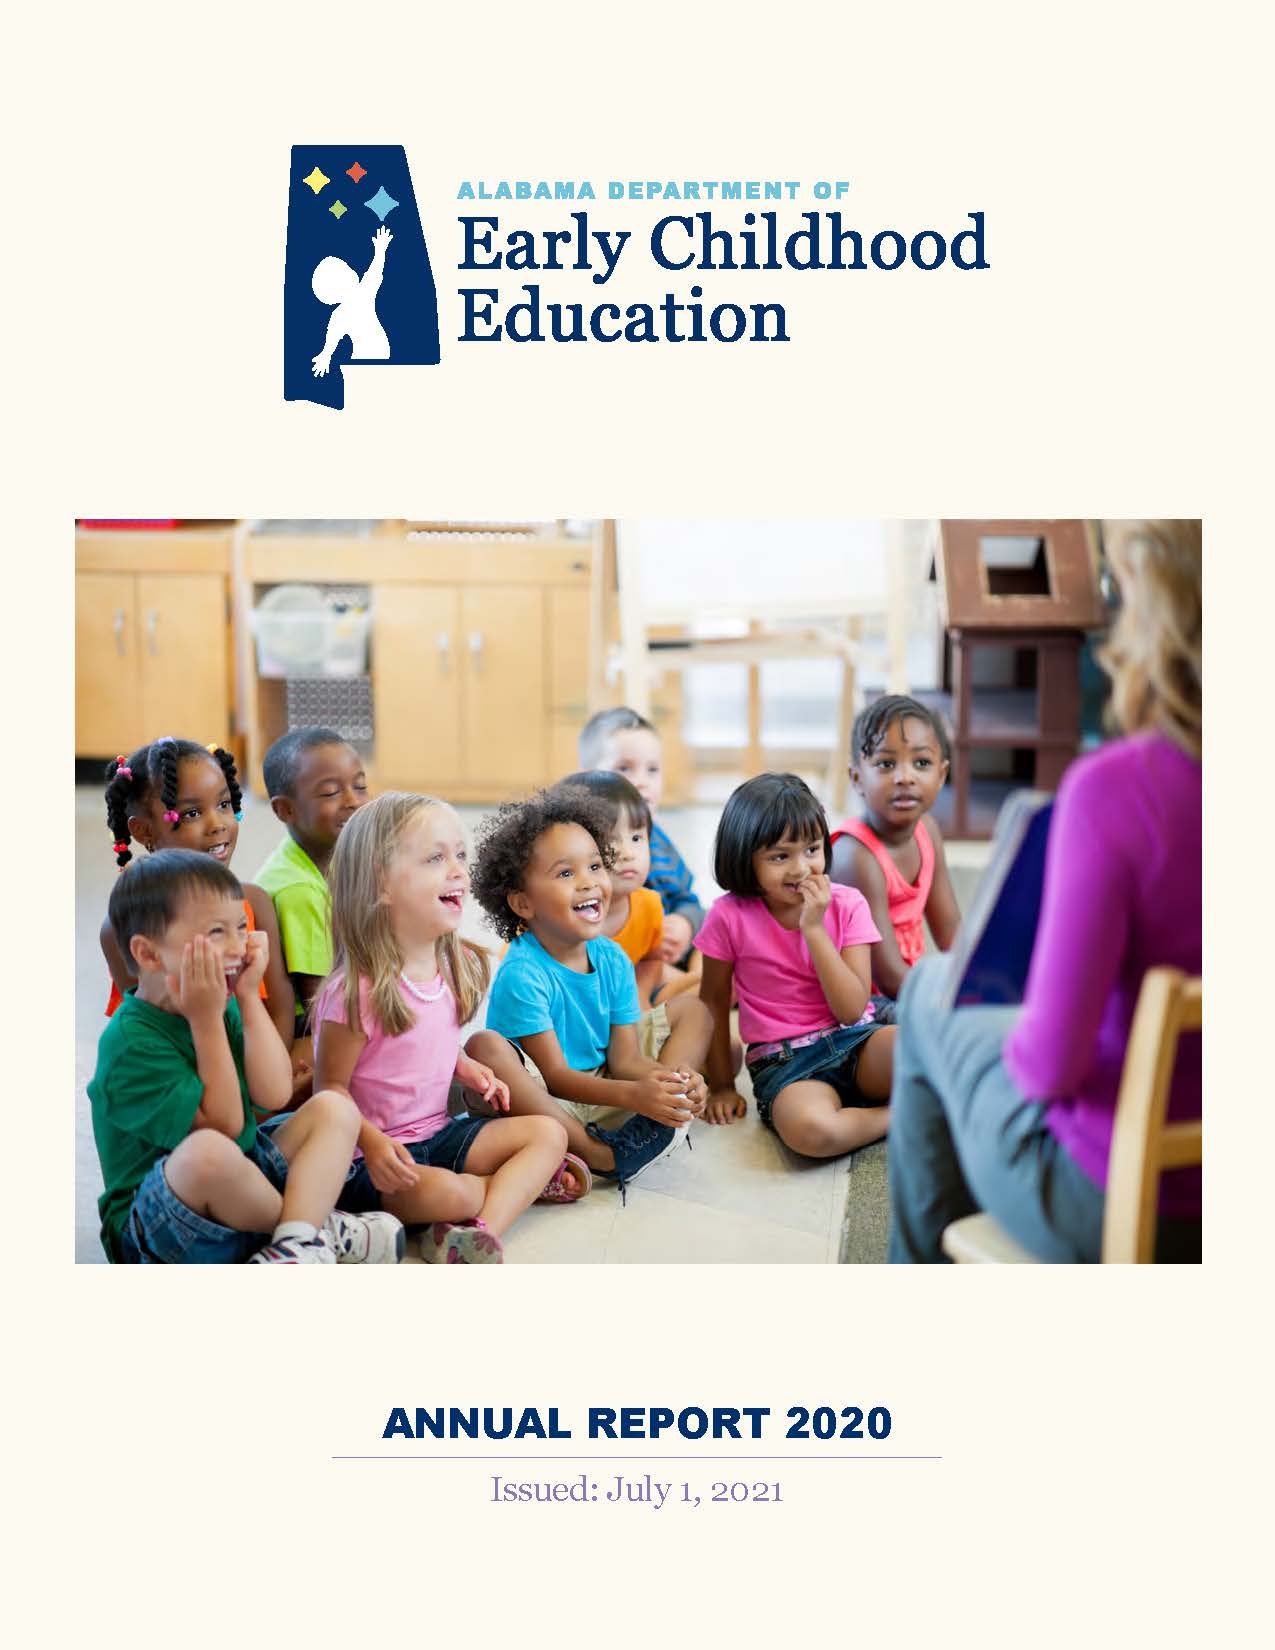 Alabama Department of Early Childhood Annual Report 2020